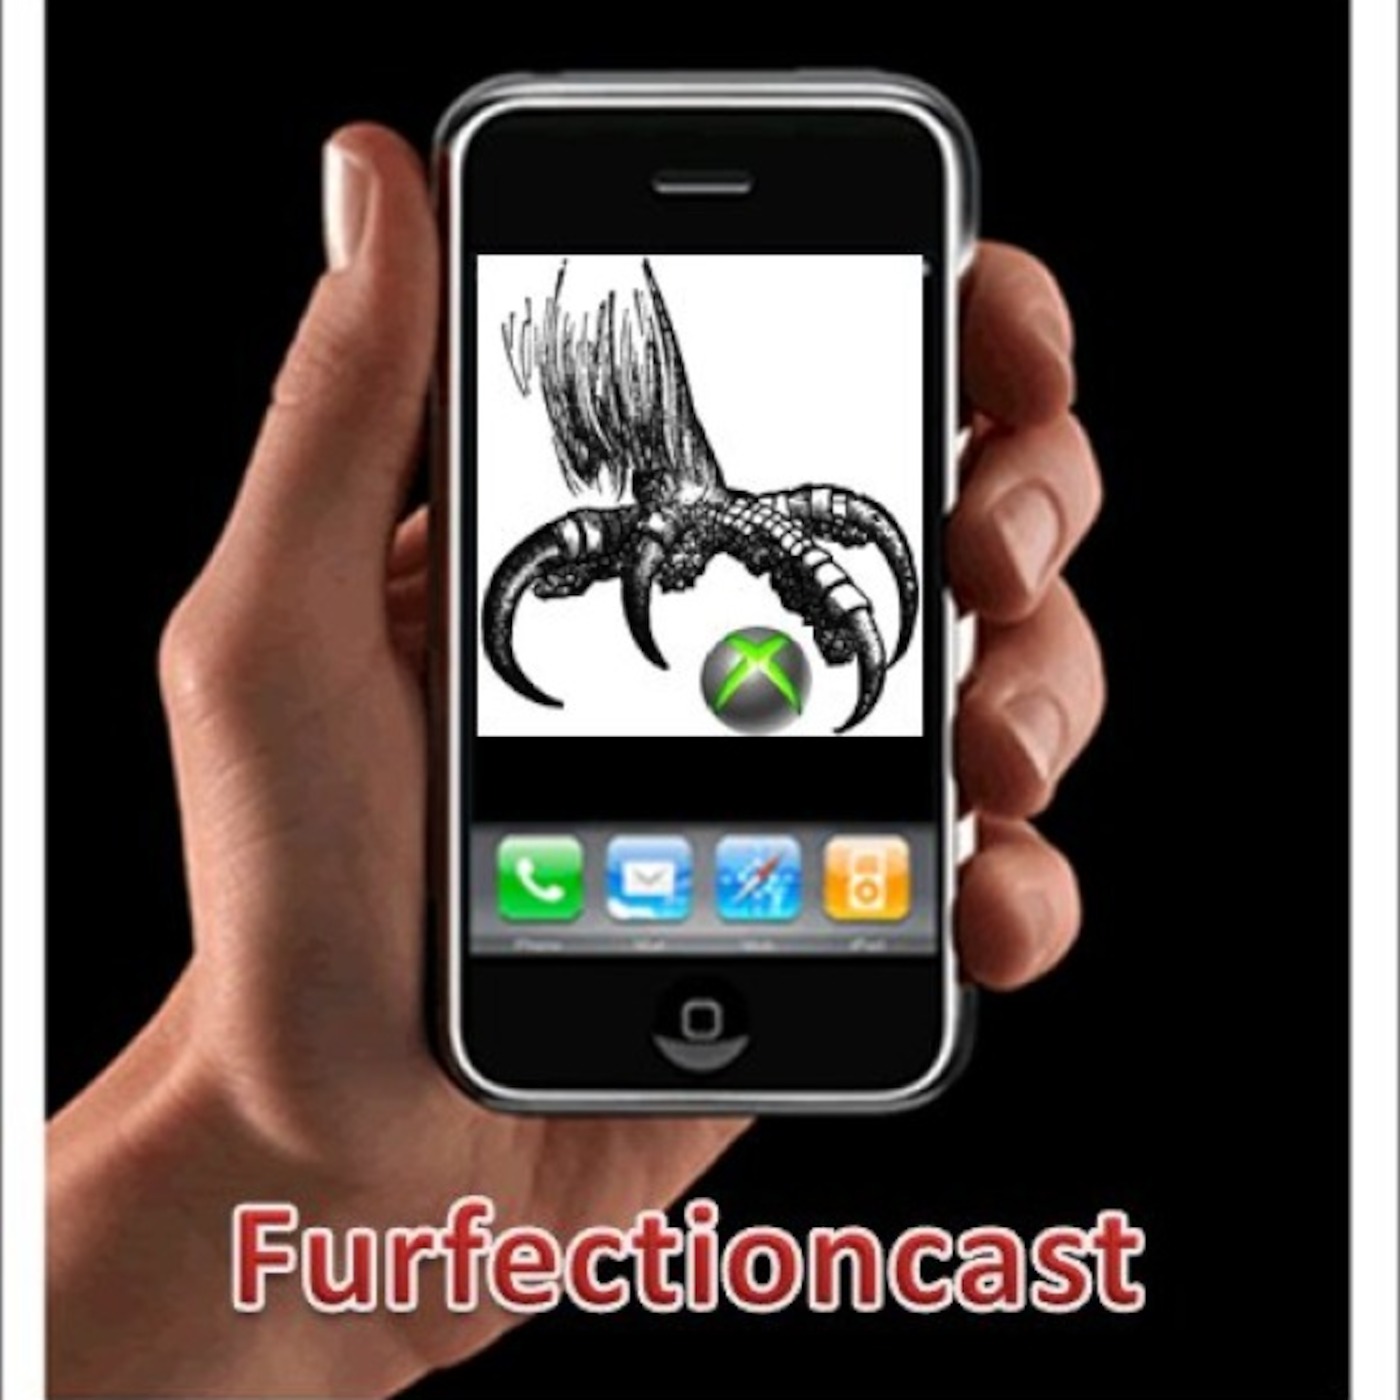 Lesson 1: What to expect from Furfectioncast